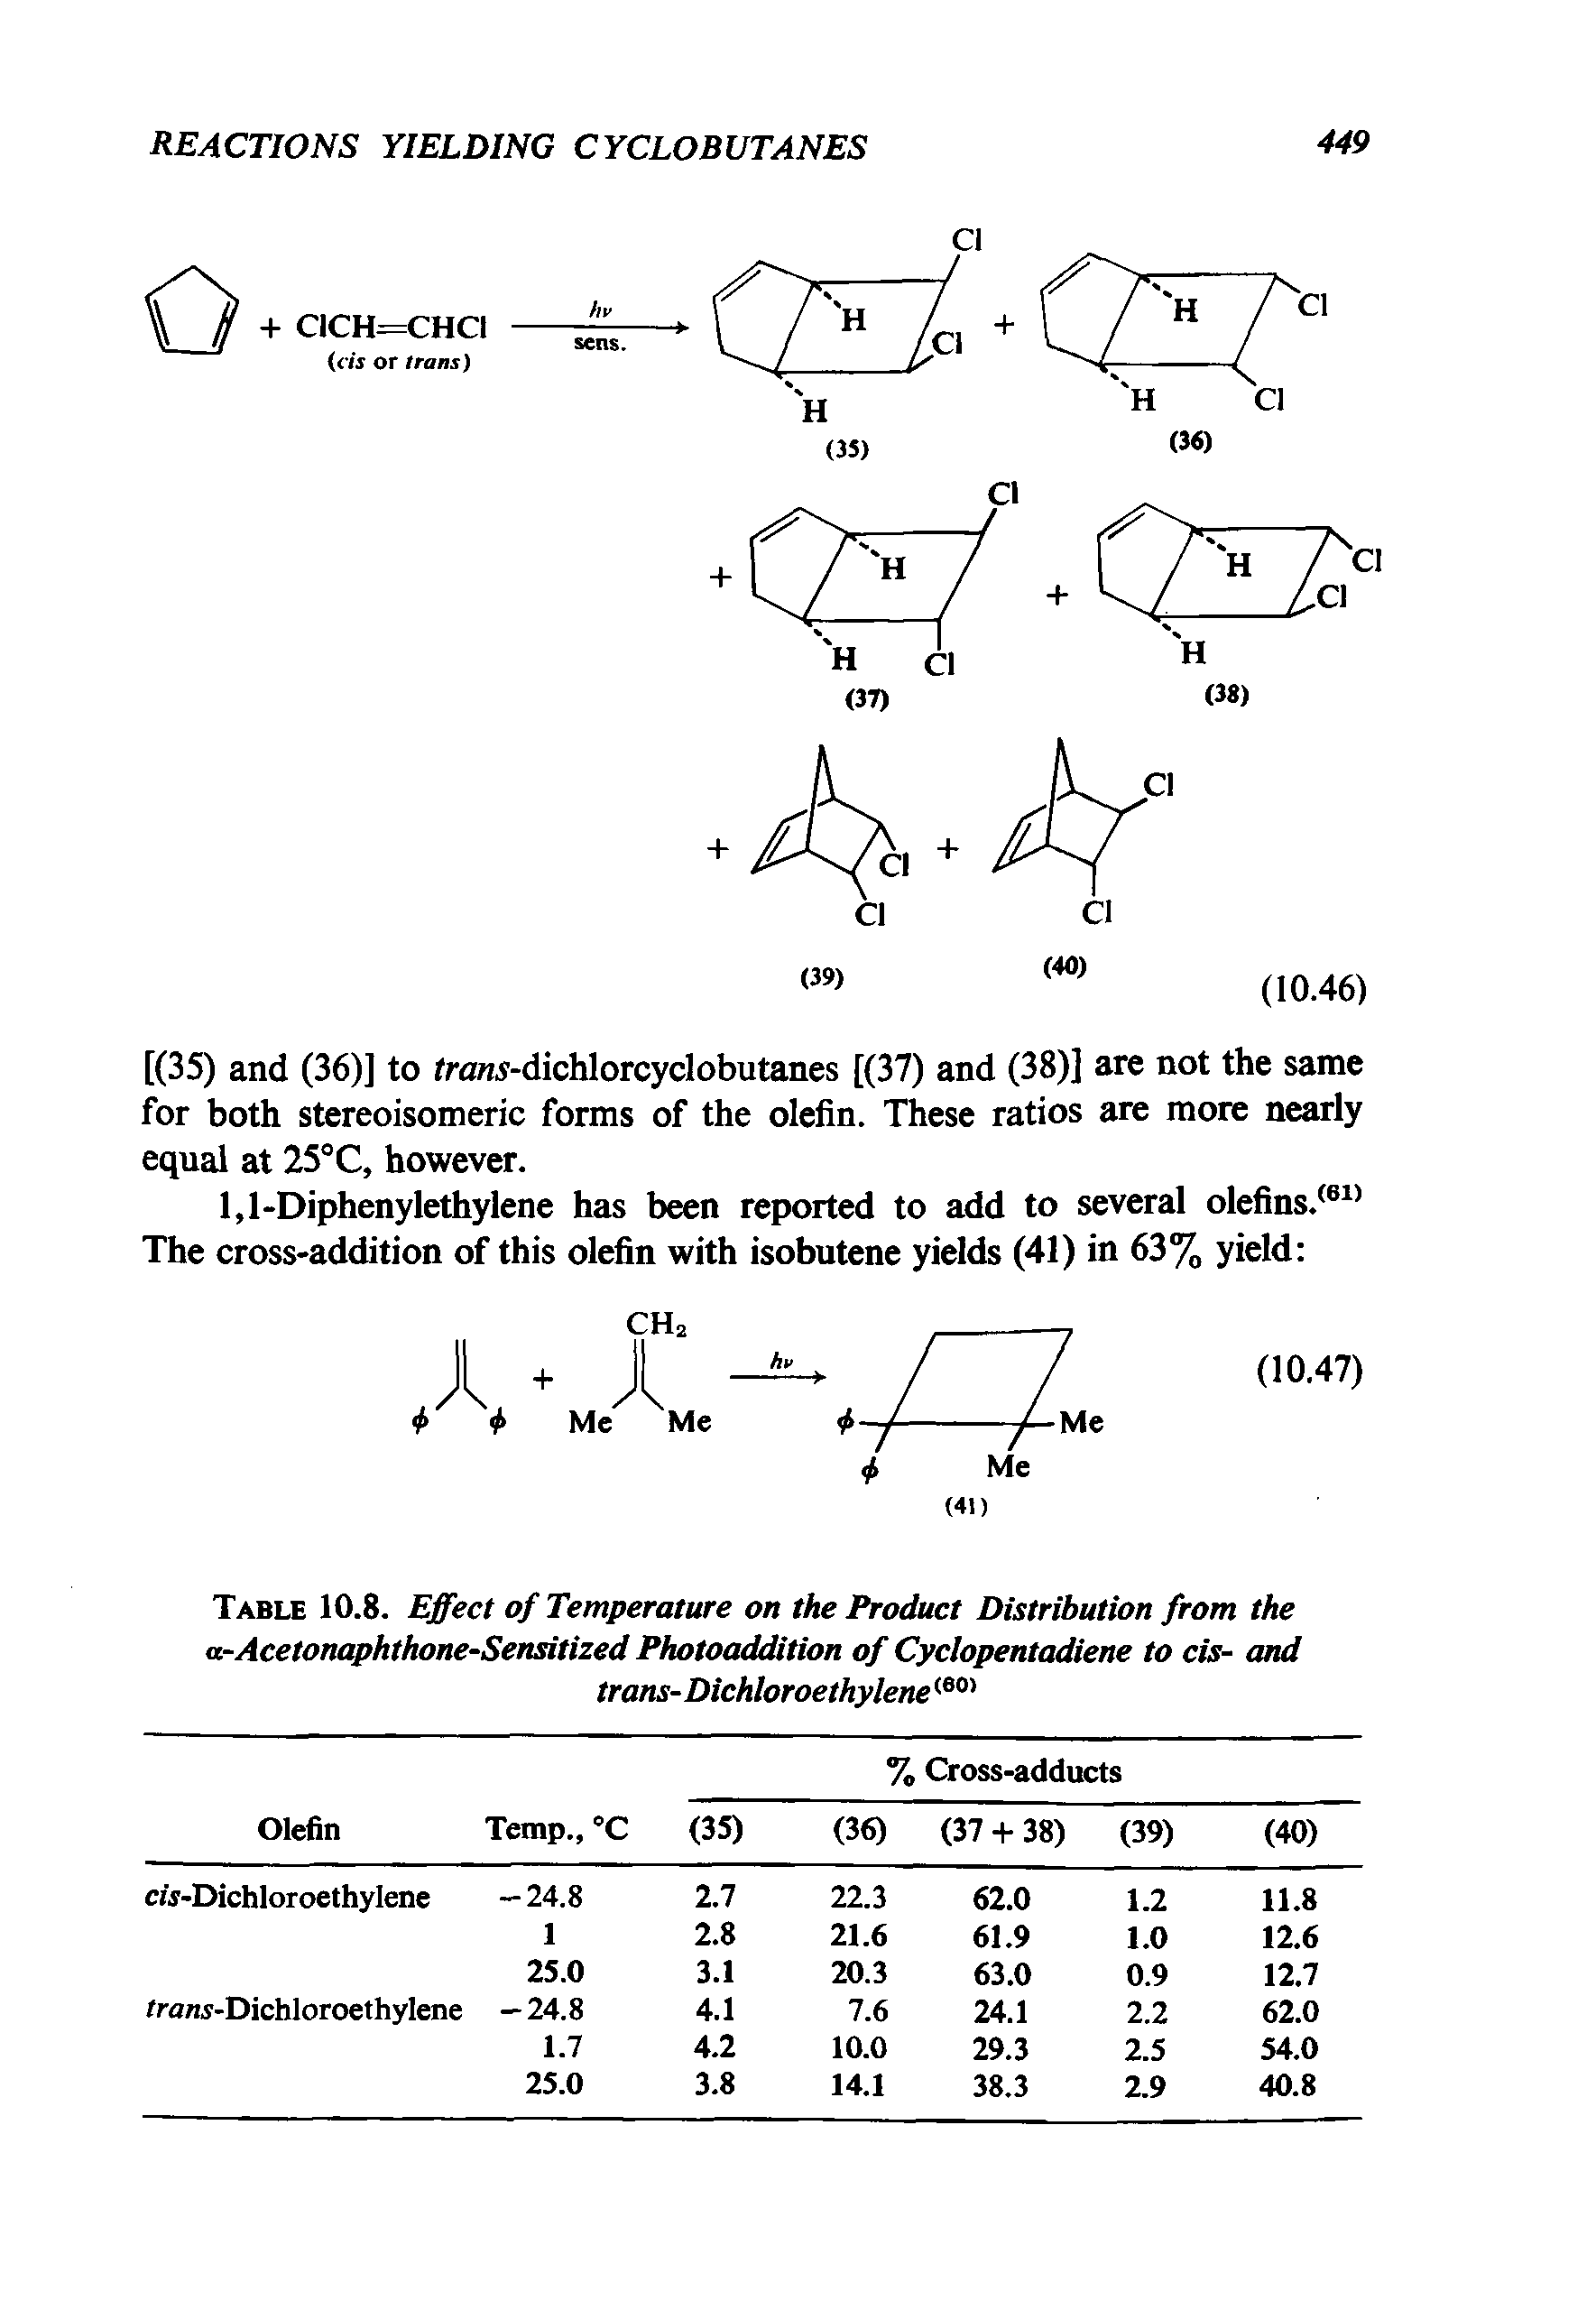 Table 10.8. Effect of Temperature on the Product Distribution from the a-Acetonaphthone-Sensitized Photoaddition of Cyclopentadiene to cis- and trans-Dichloroethylene<60>...